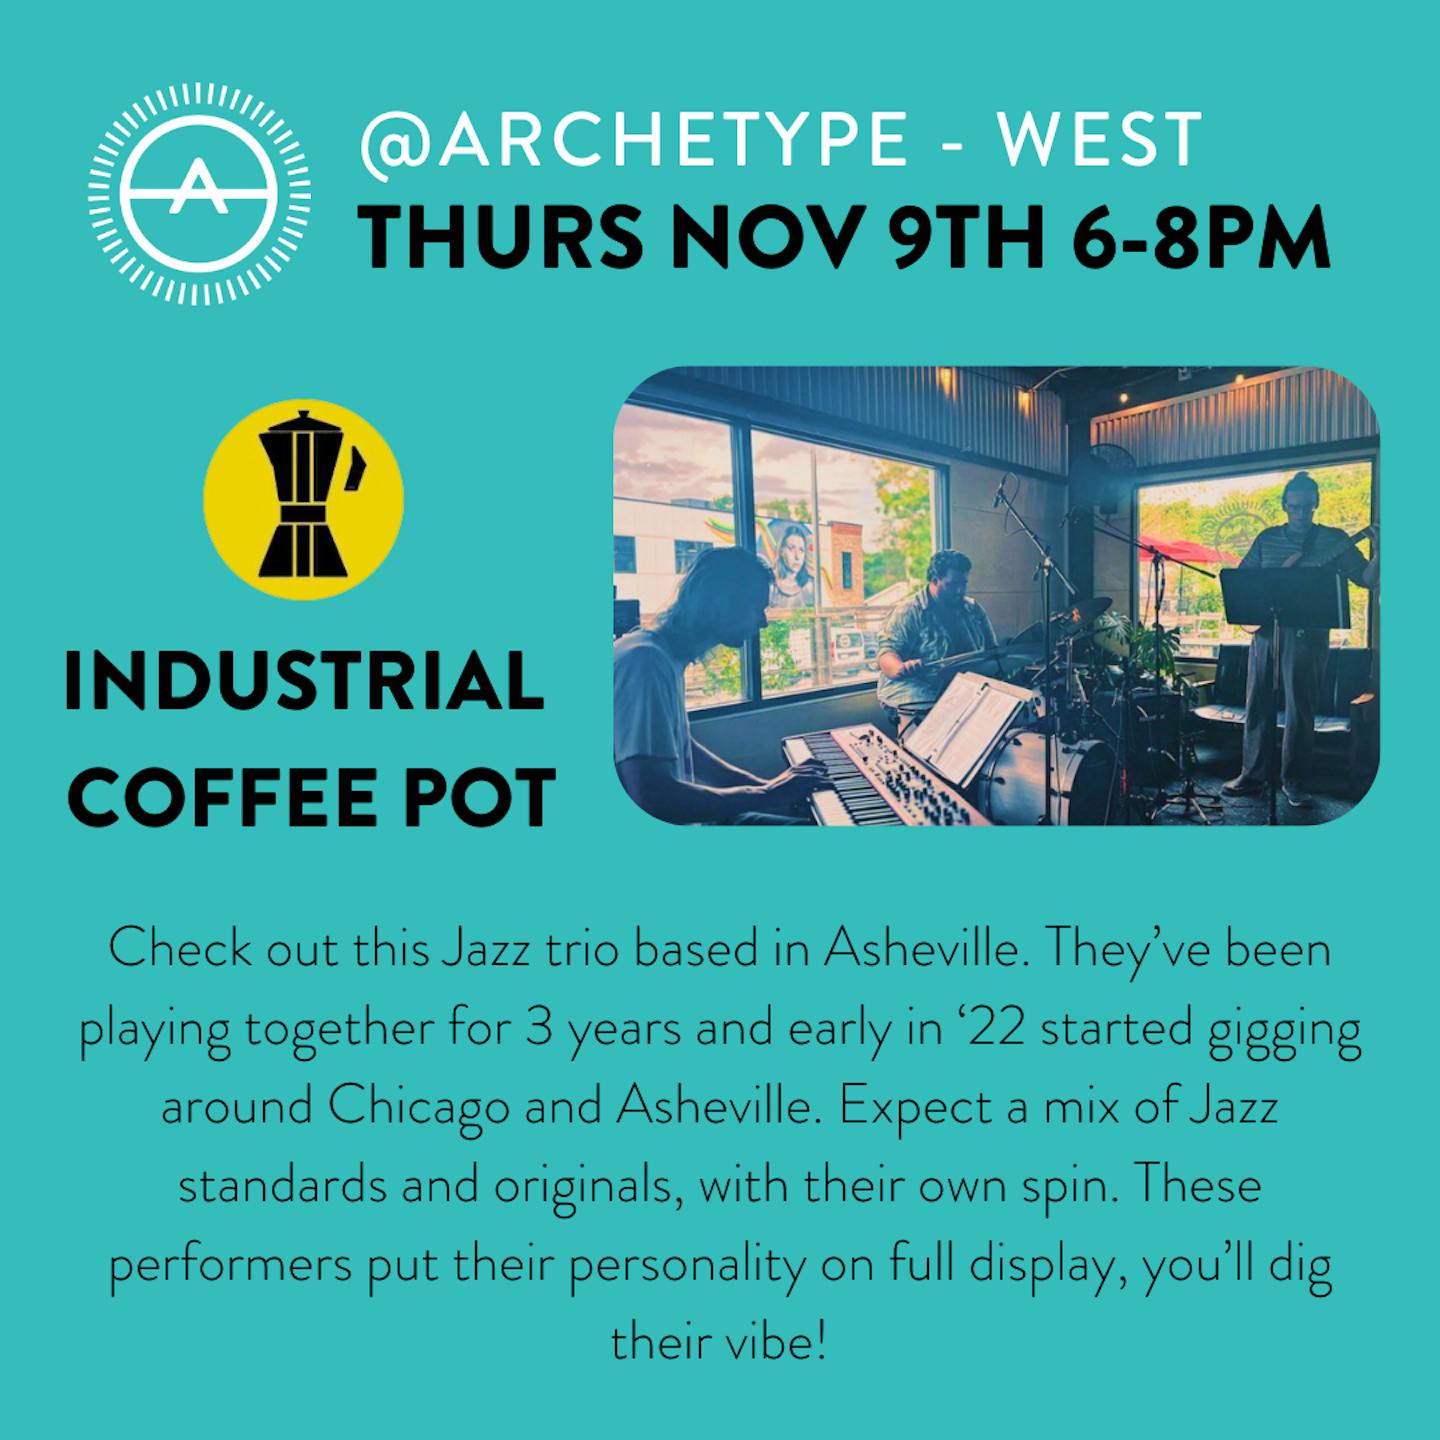 Check out this Jazz trio based in Asheville. They’ve been playing together for 3 years and early in ‘22 started gigging around Chicago and Asheville. Expect a mix of Jazz standards and originals,